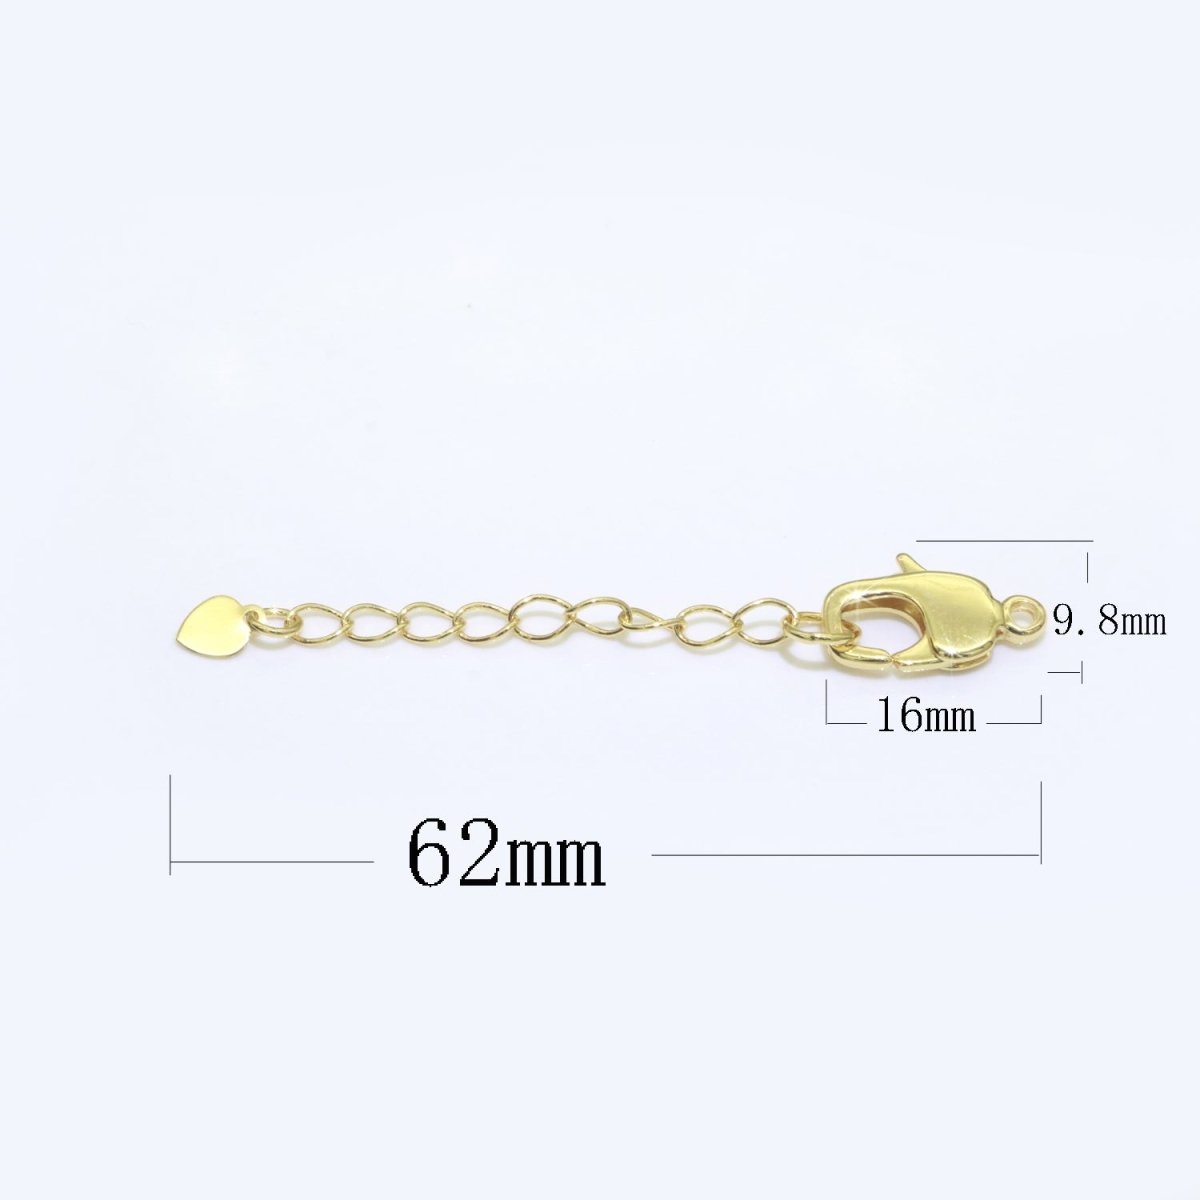 2.5 inch Gold Filled Chain Extender For Necklace Bracelet Supply Component Findings Extenders w/ Heart charm + Lobster Clasp L-504 L-505 - DLUXCA